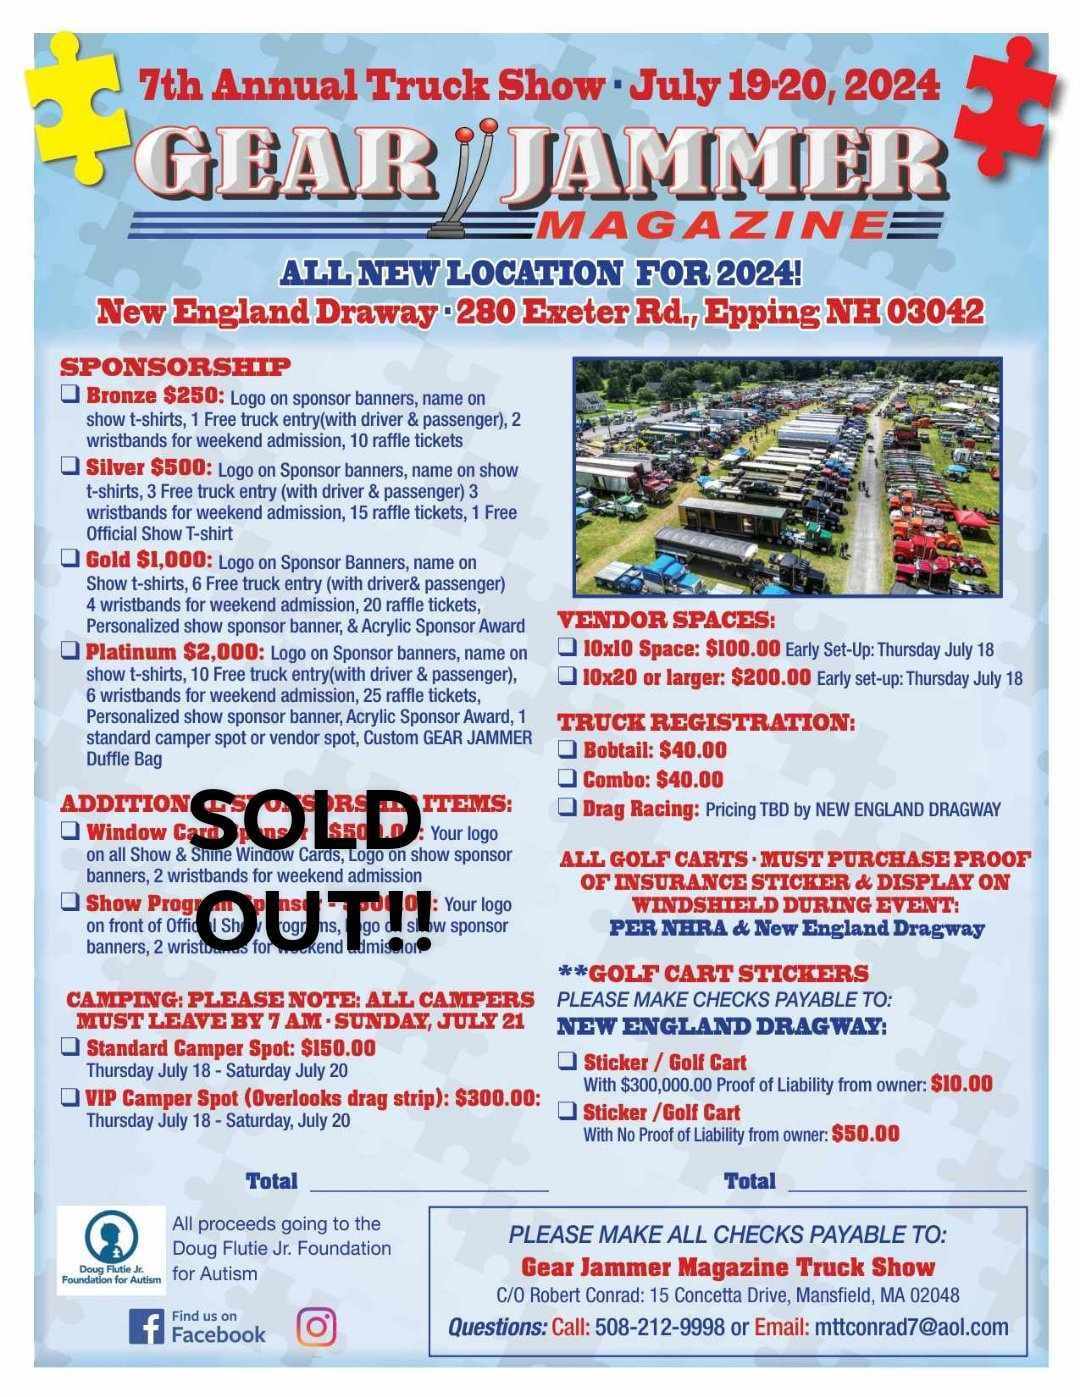 7th ANNUAL GEAR JAMMER MAGAZINE TRUCK SHOW….JULY 19-20 2024